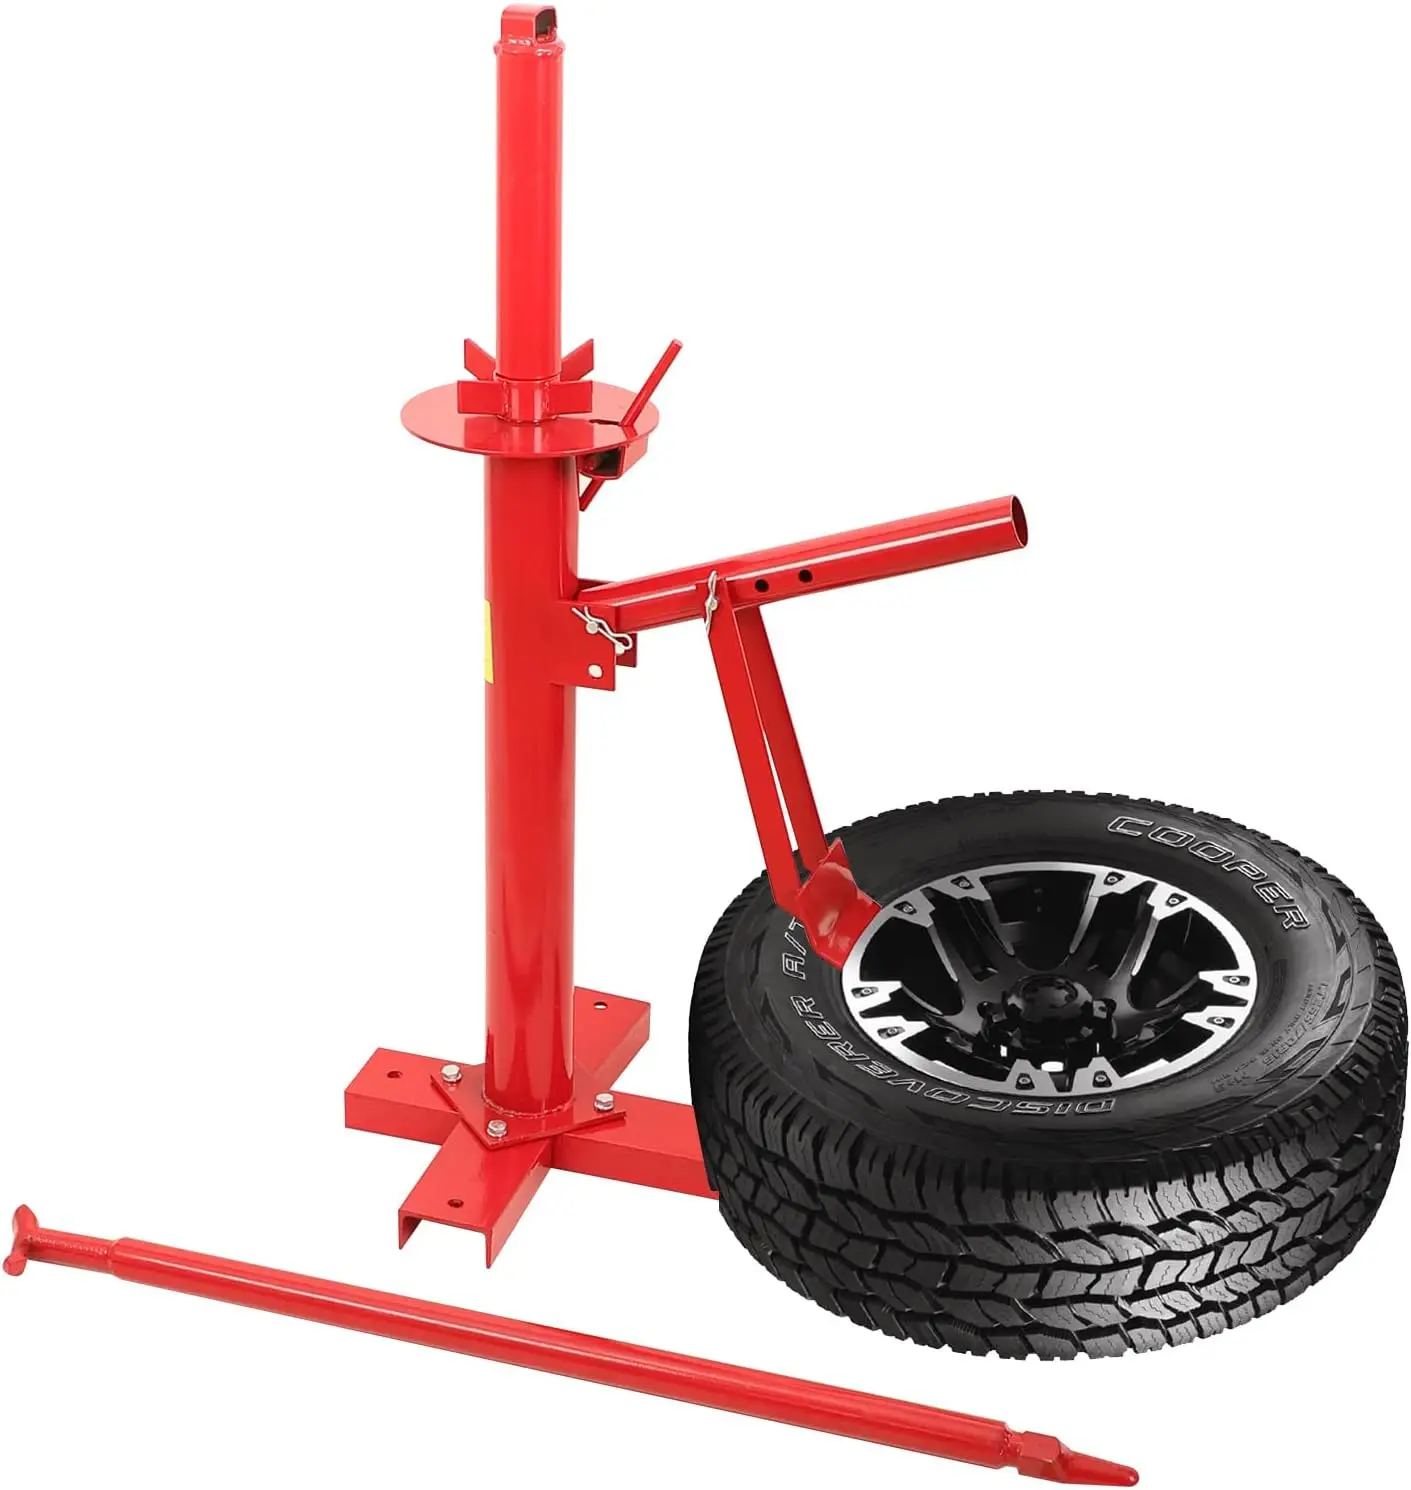 

Tire Changer, Portable Hand Bead Breaker Mounting Tool for 8" to 16" Tires, for Car Truck Home Garage Small Auto Shop